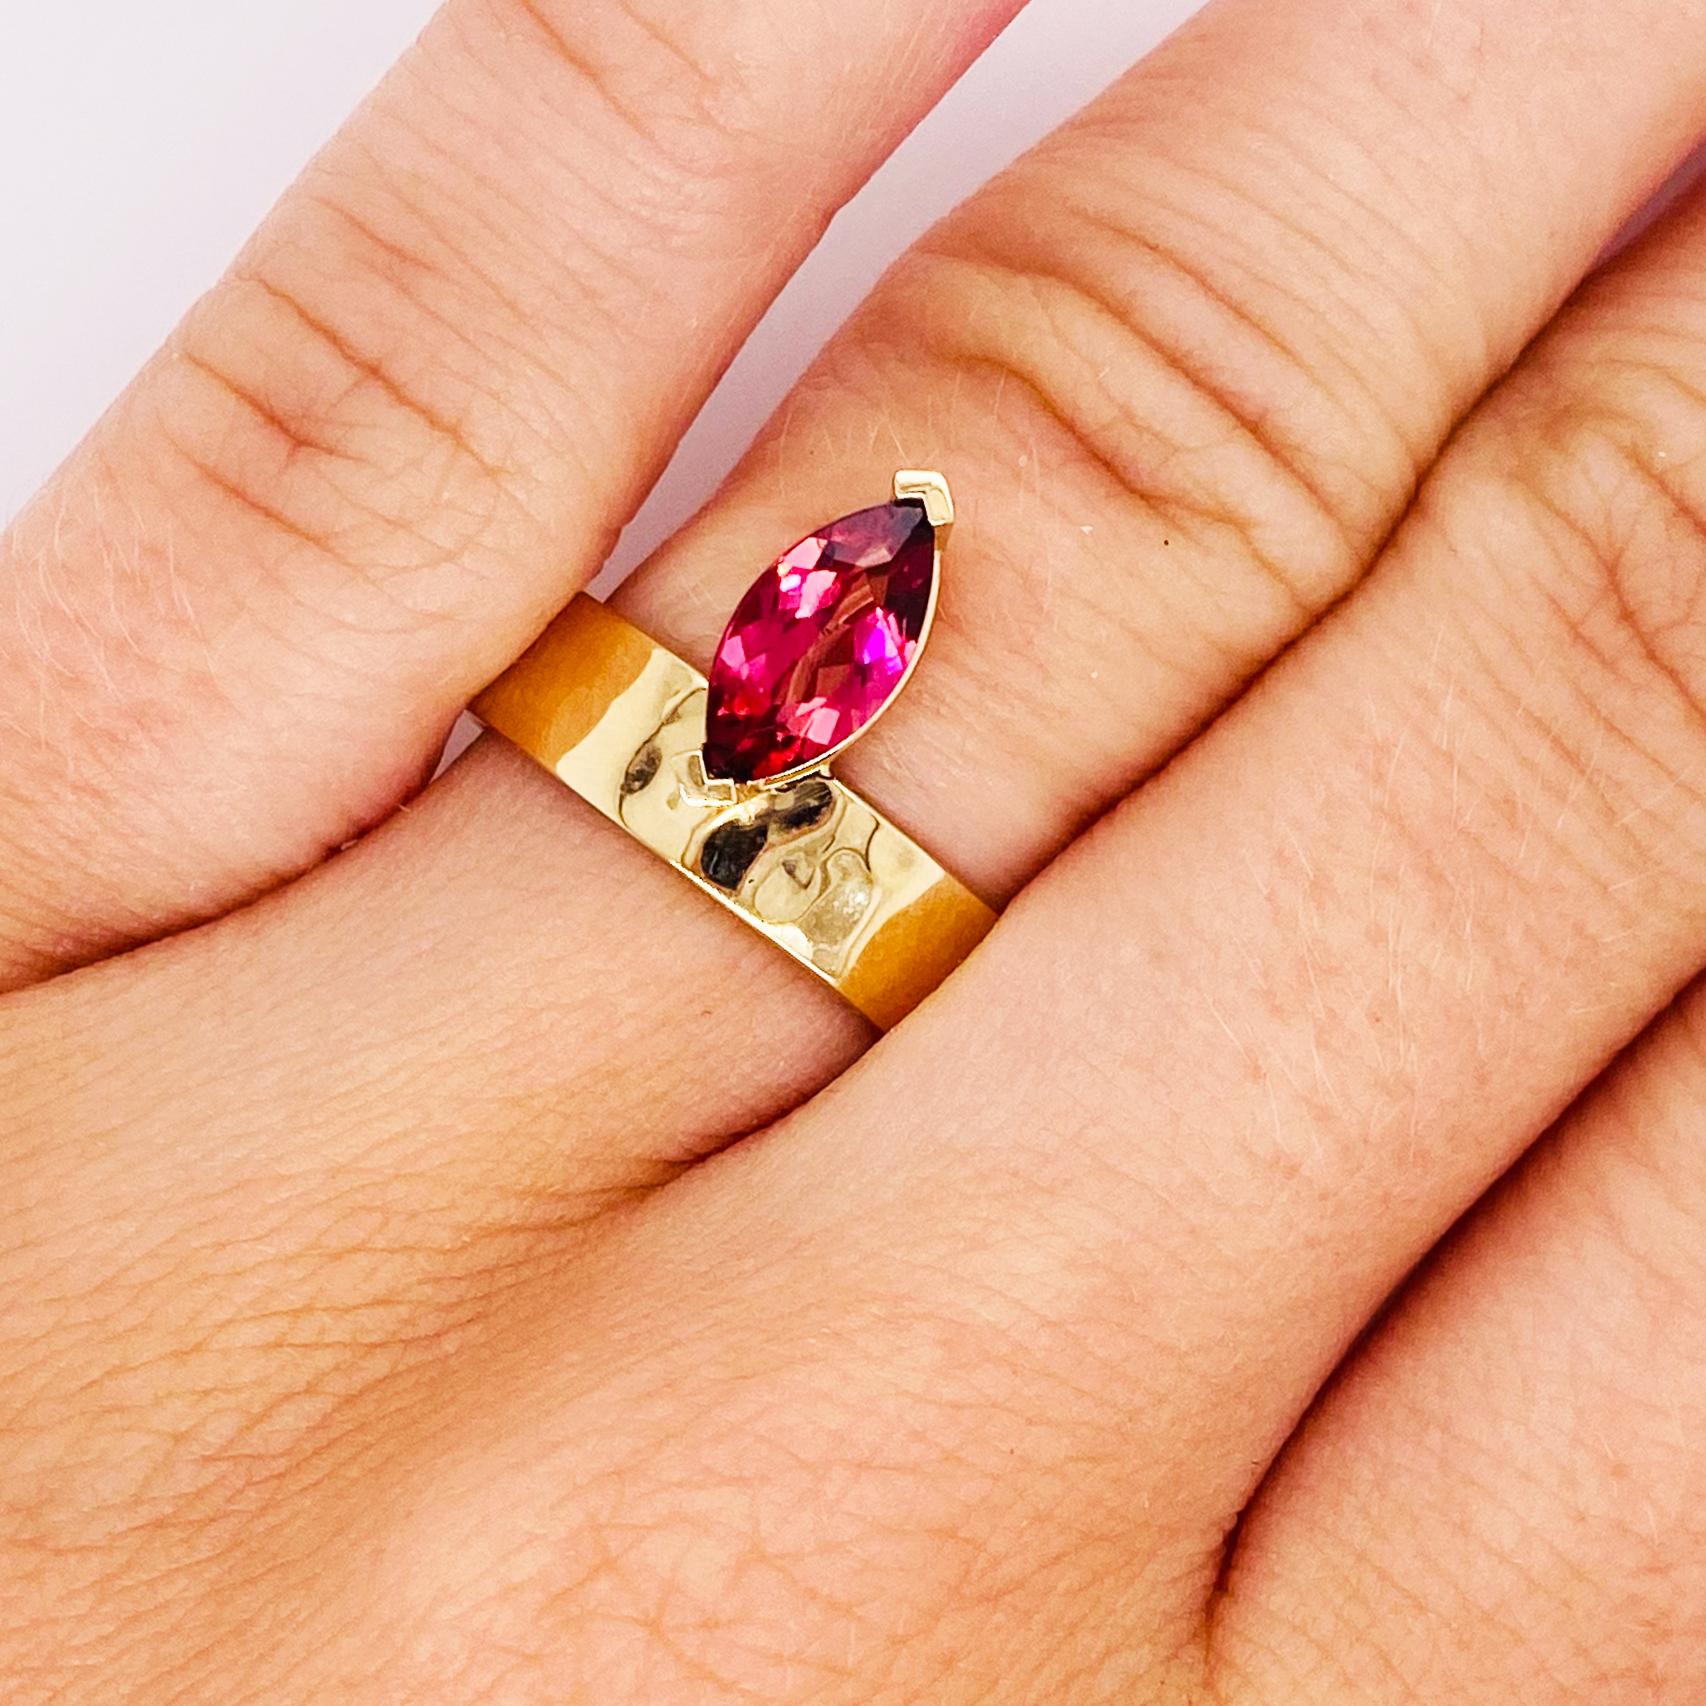 This off-set design is a 14k yellow gold band that is 5 millimeters(mm) wide with a gorgeous marquise pink tourmaline added to it. The genuine bright pink tourmaline is set in a secure basket setting. The band is hammered all the way around and the